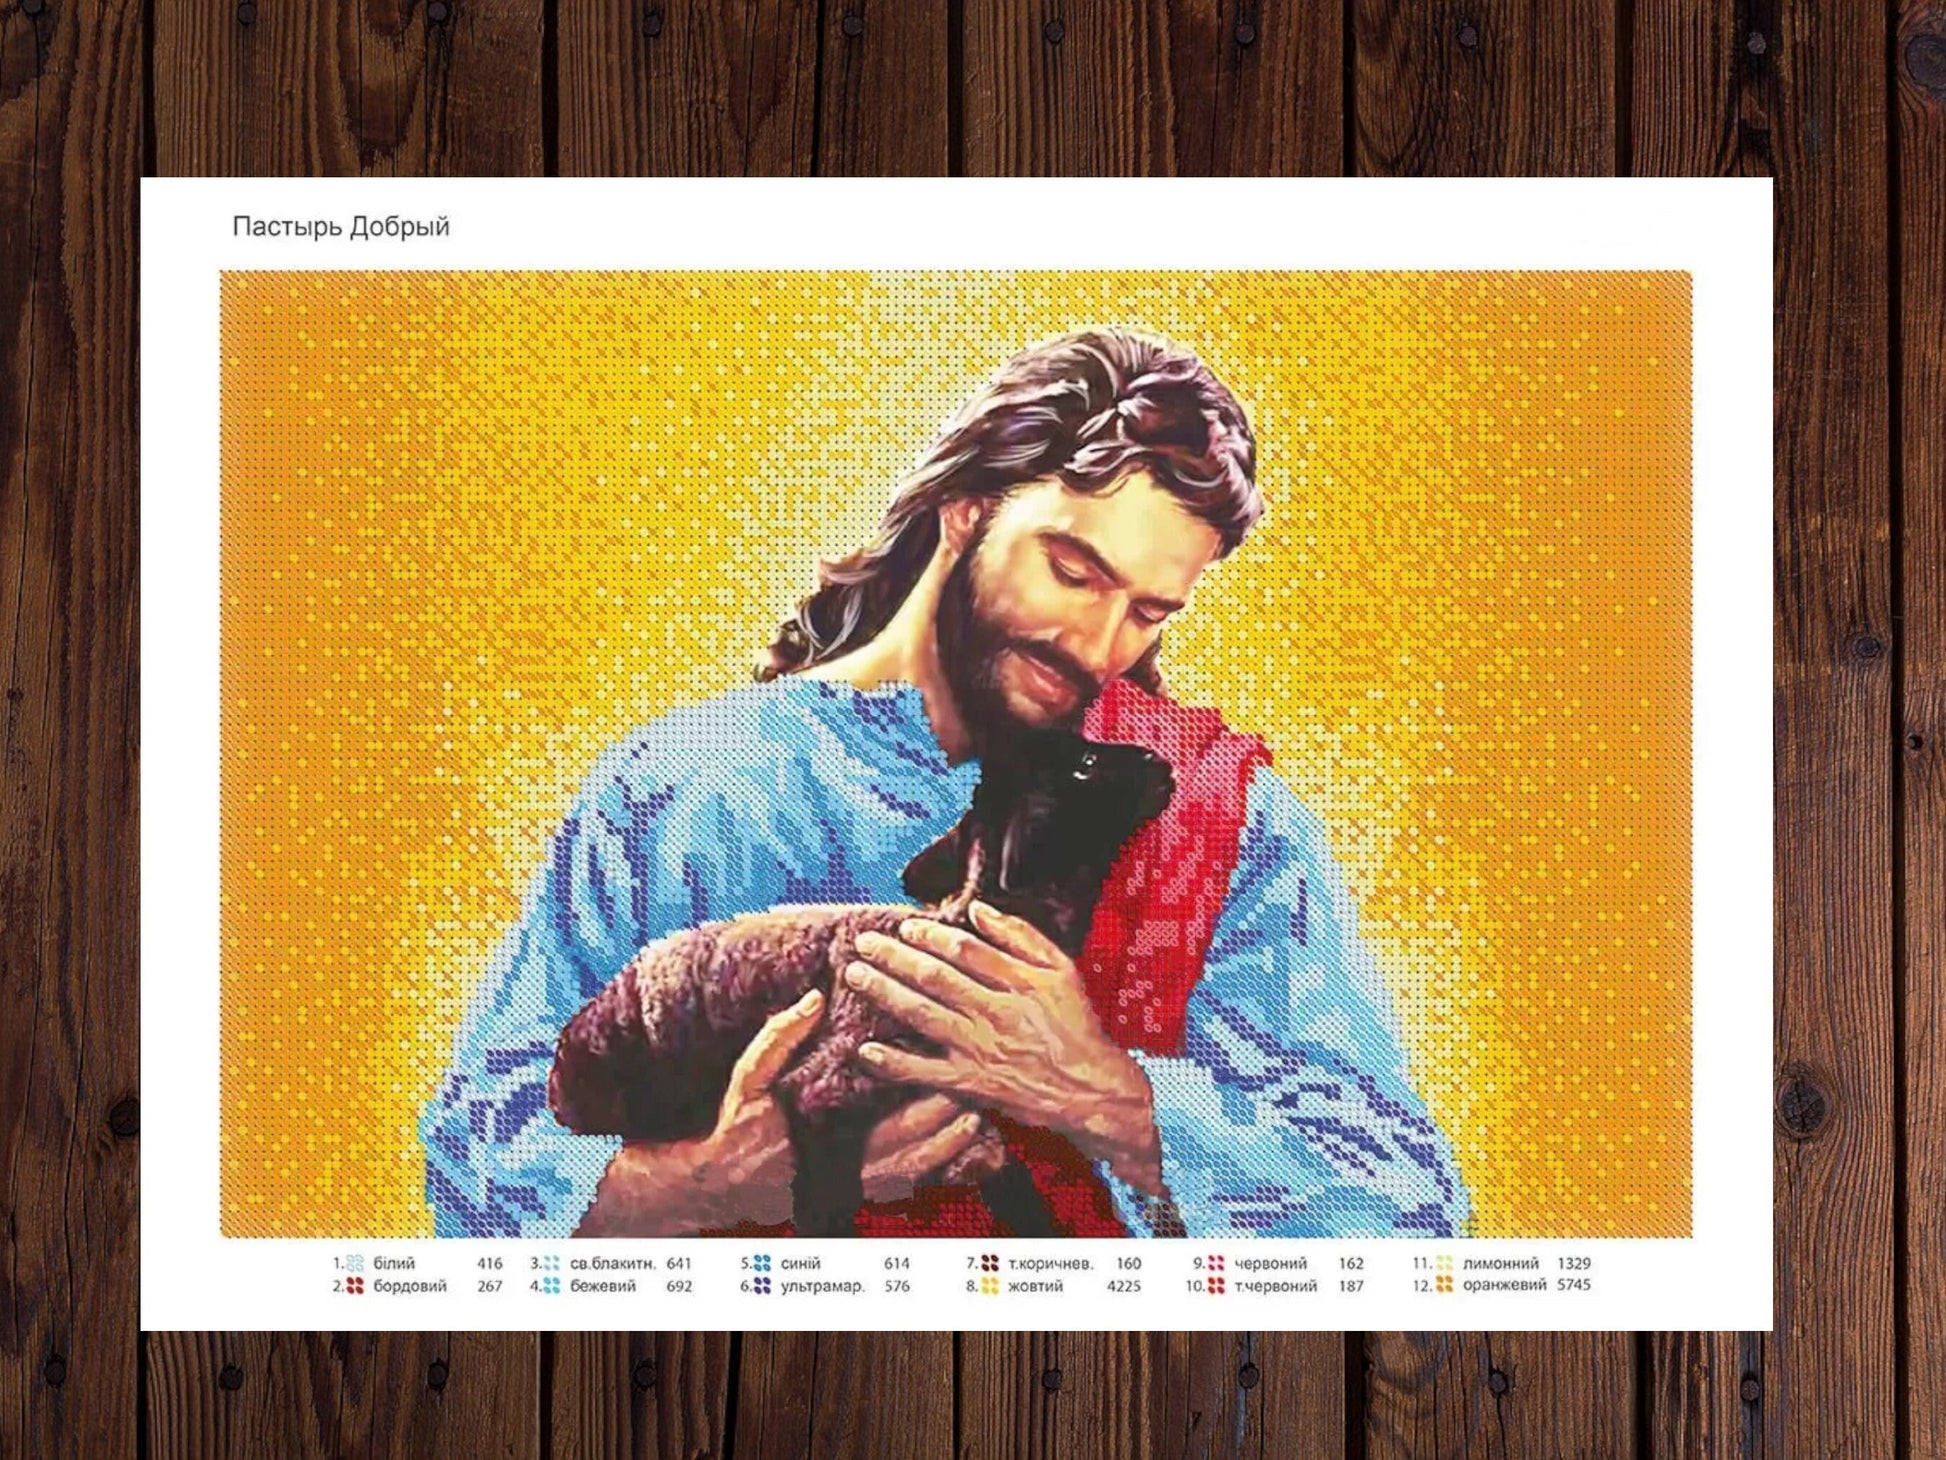 DIY Bead Embroidery Kit Jesus: Craft a beautiful symbol of faith and love - VadymShop